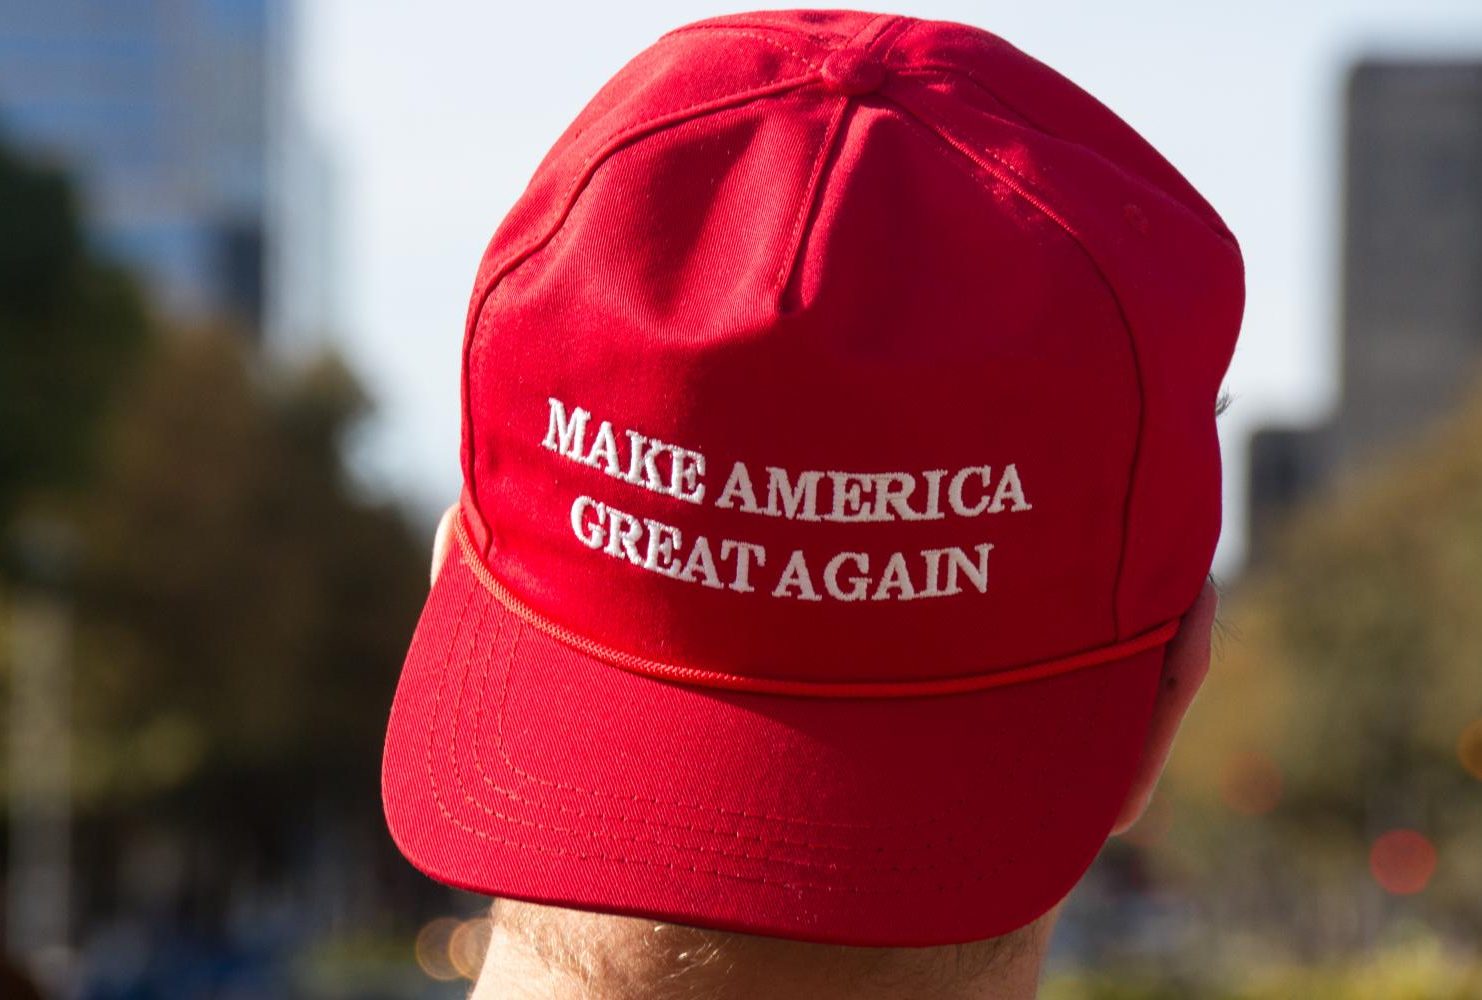 A demonstrator wearing a “Make America Great Again” hat at the “Turn California Red” conservative rally at the Sacramento State Capitol on Nov. 4, 2018. (Photo by Patrick Hyun Wilson)